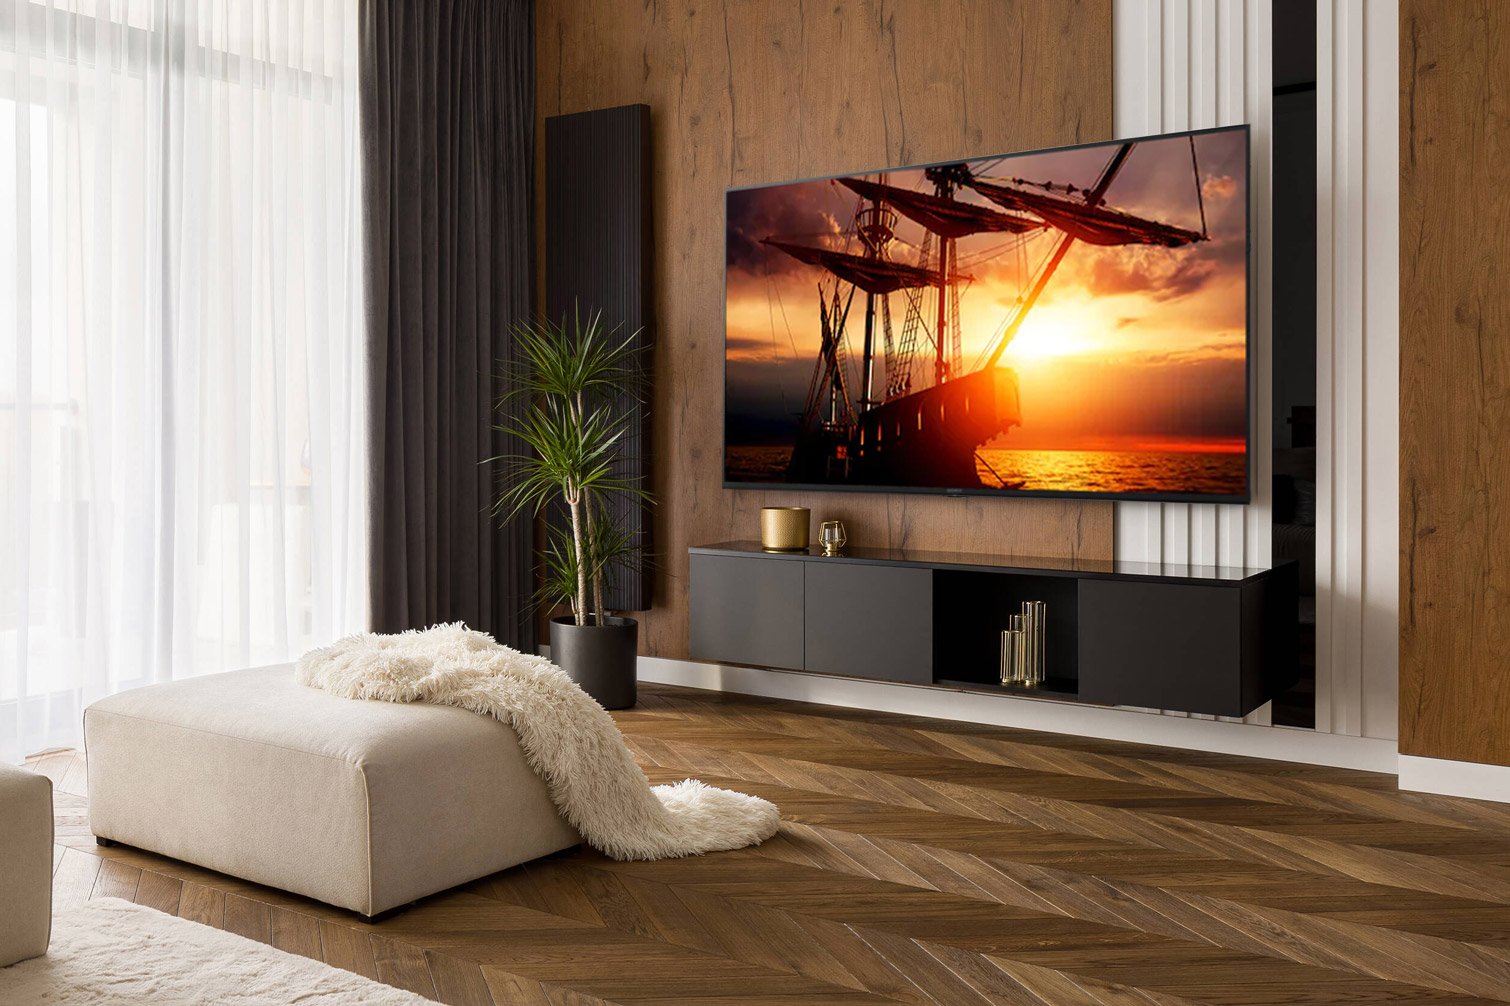 Smart Tivi 4K Sony KD-50X75 50 inch 4K HDR Android TV